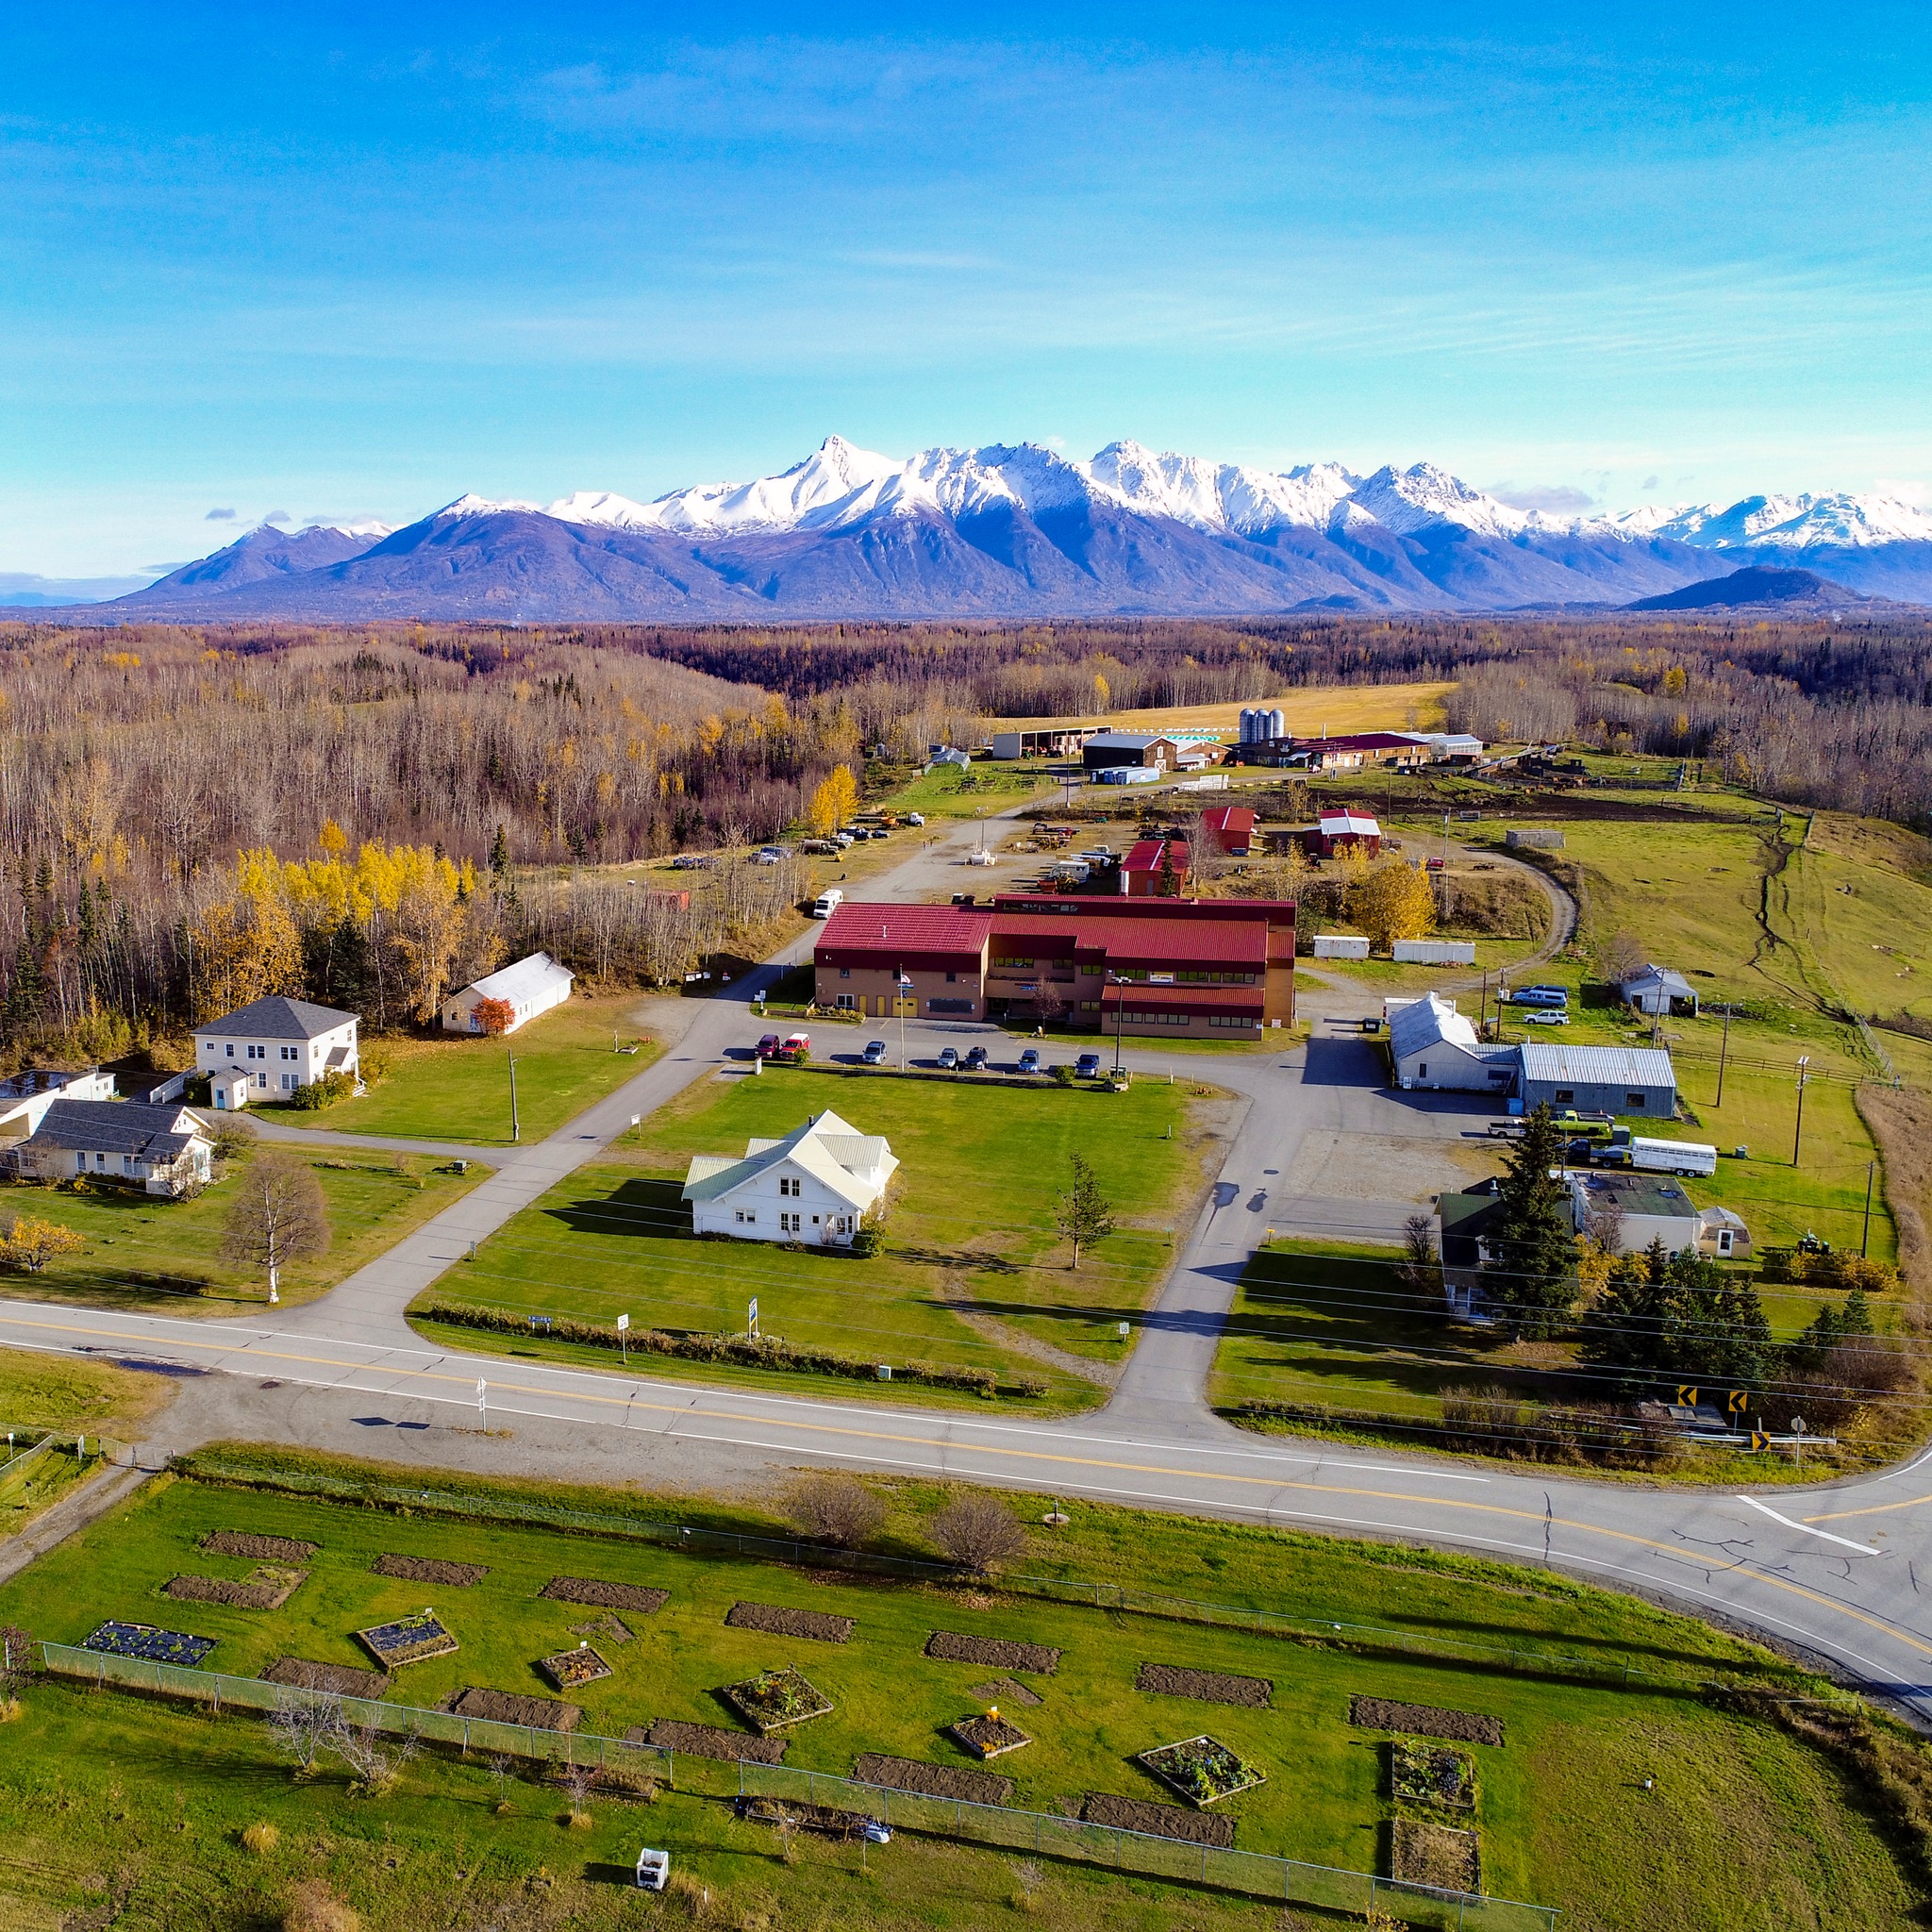 An aerial view of gardens, barns and other farm buildings with snow-capped mountains in the background.